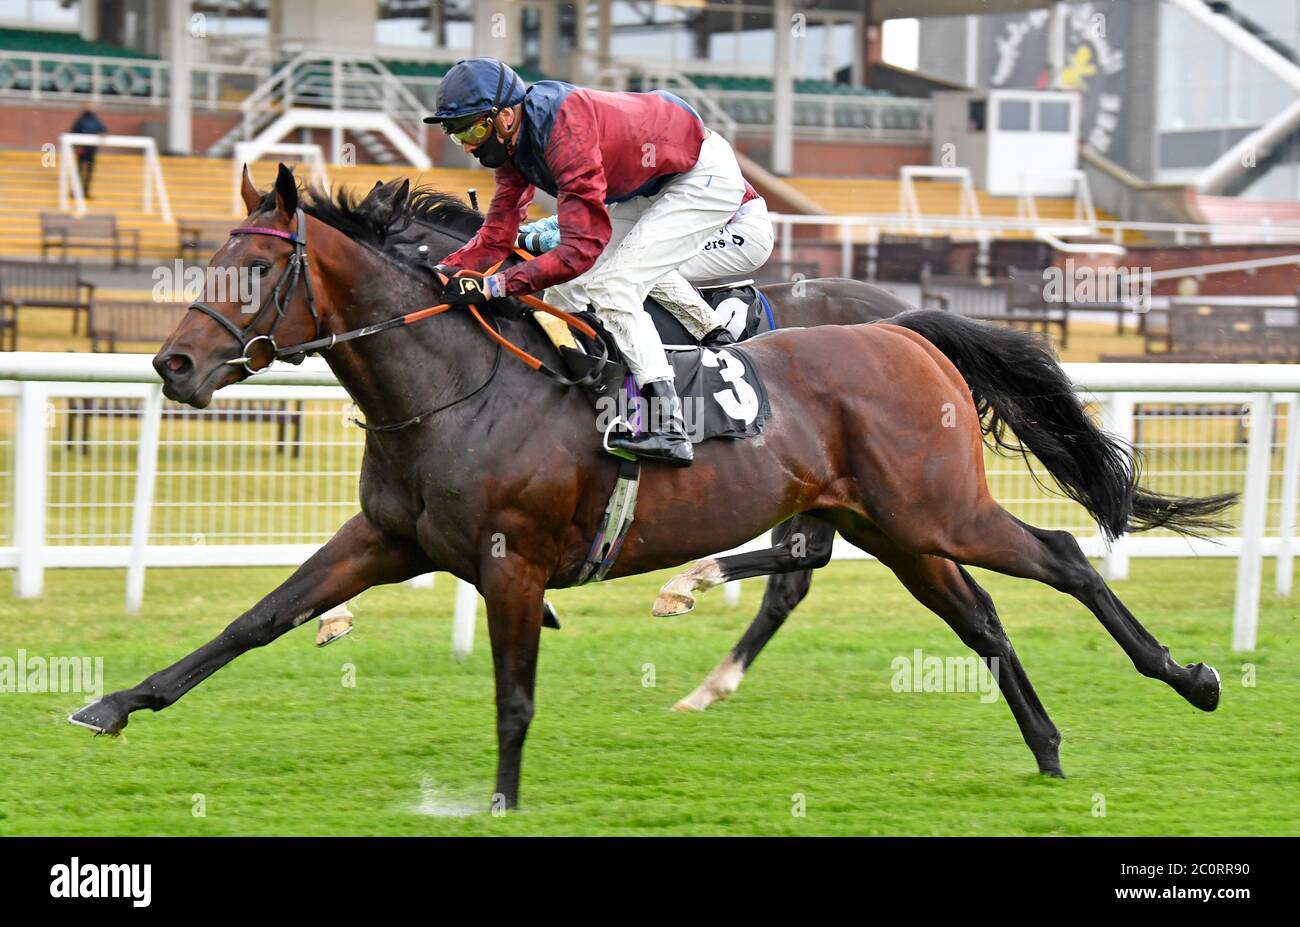 Johan ridden by James Doyle wins the It's Not Rocket Science with MansionBet Handicap at Newbury Racecourse. Stock Photo